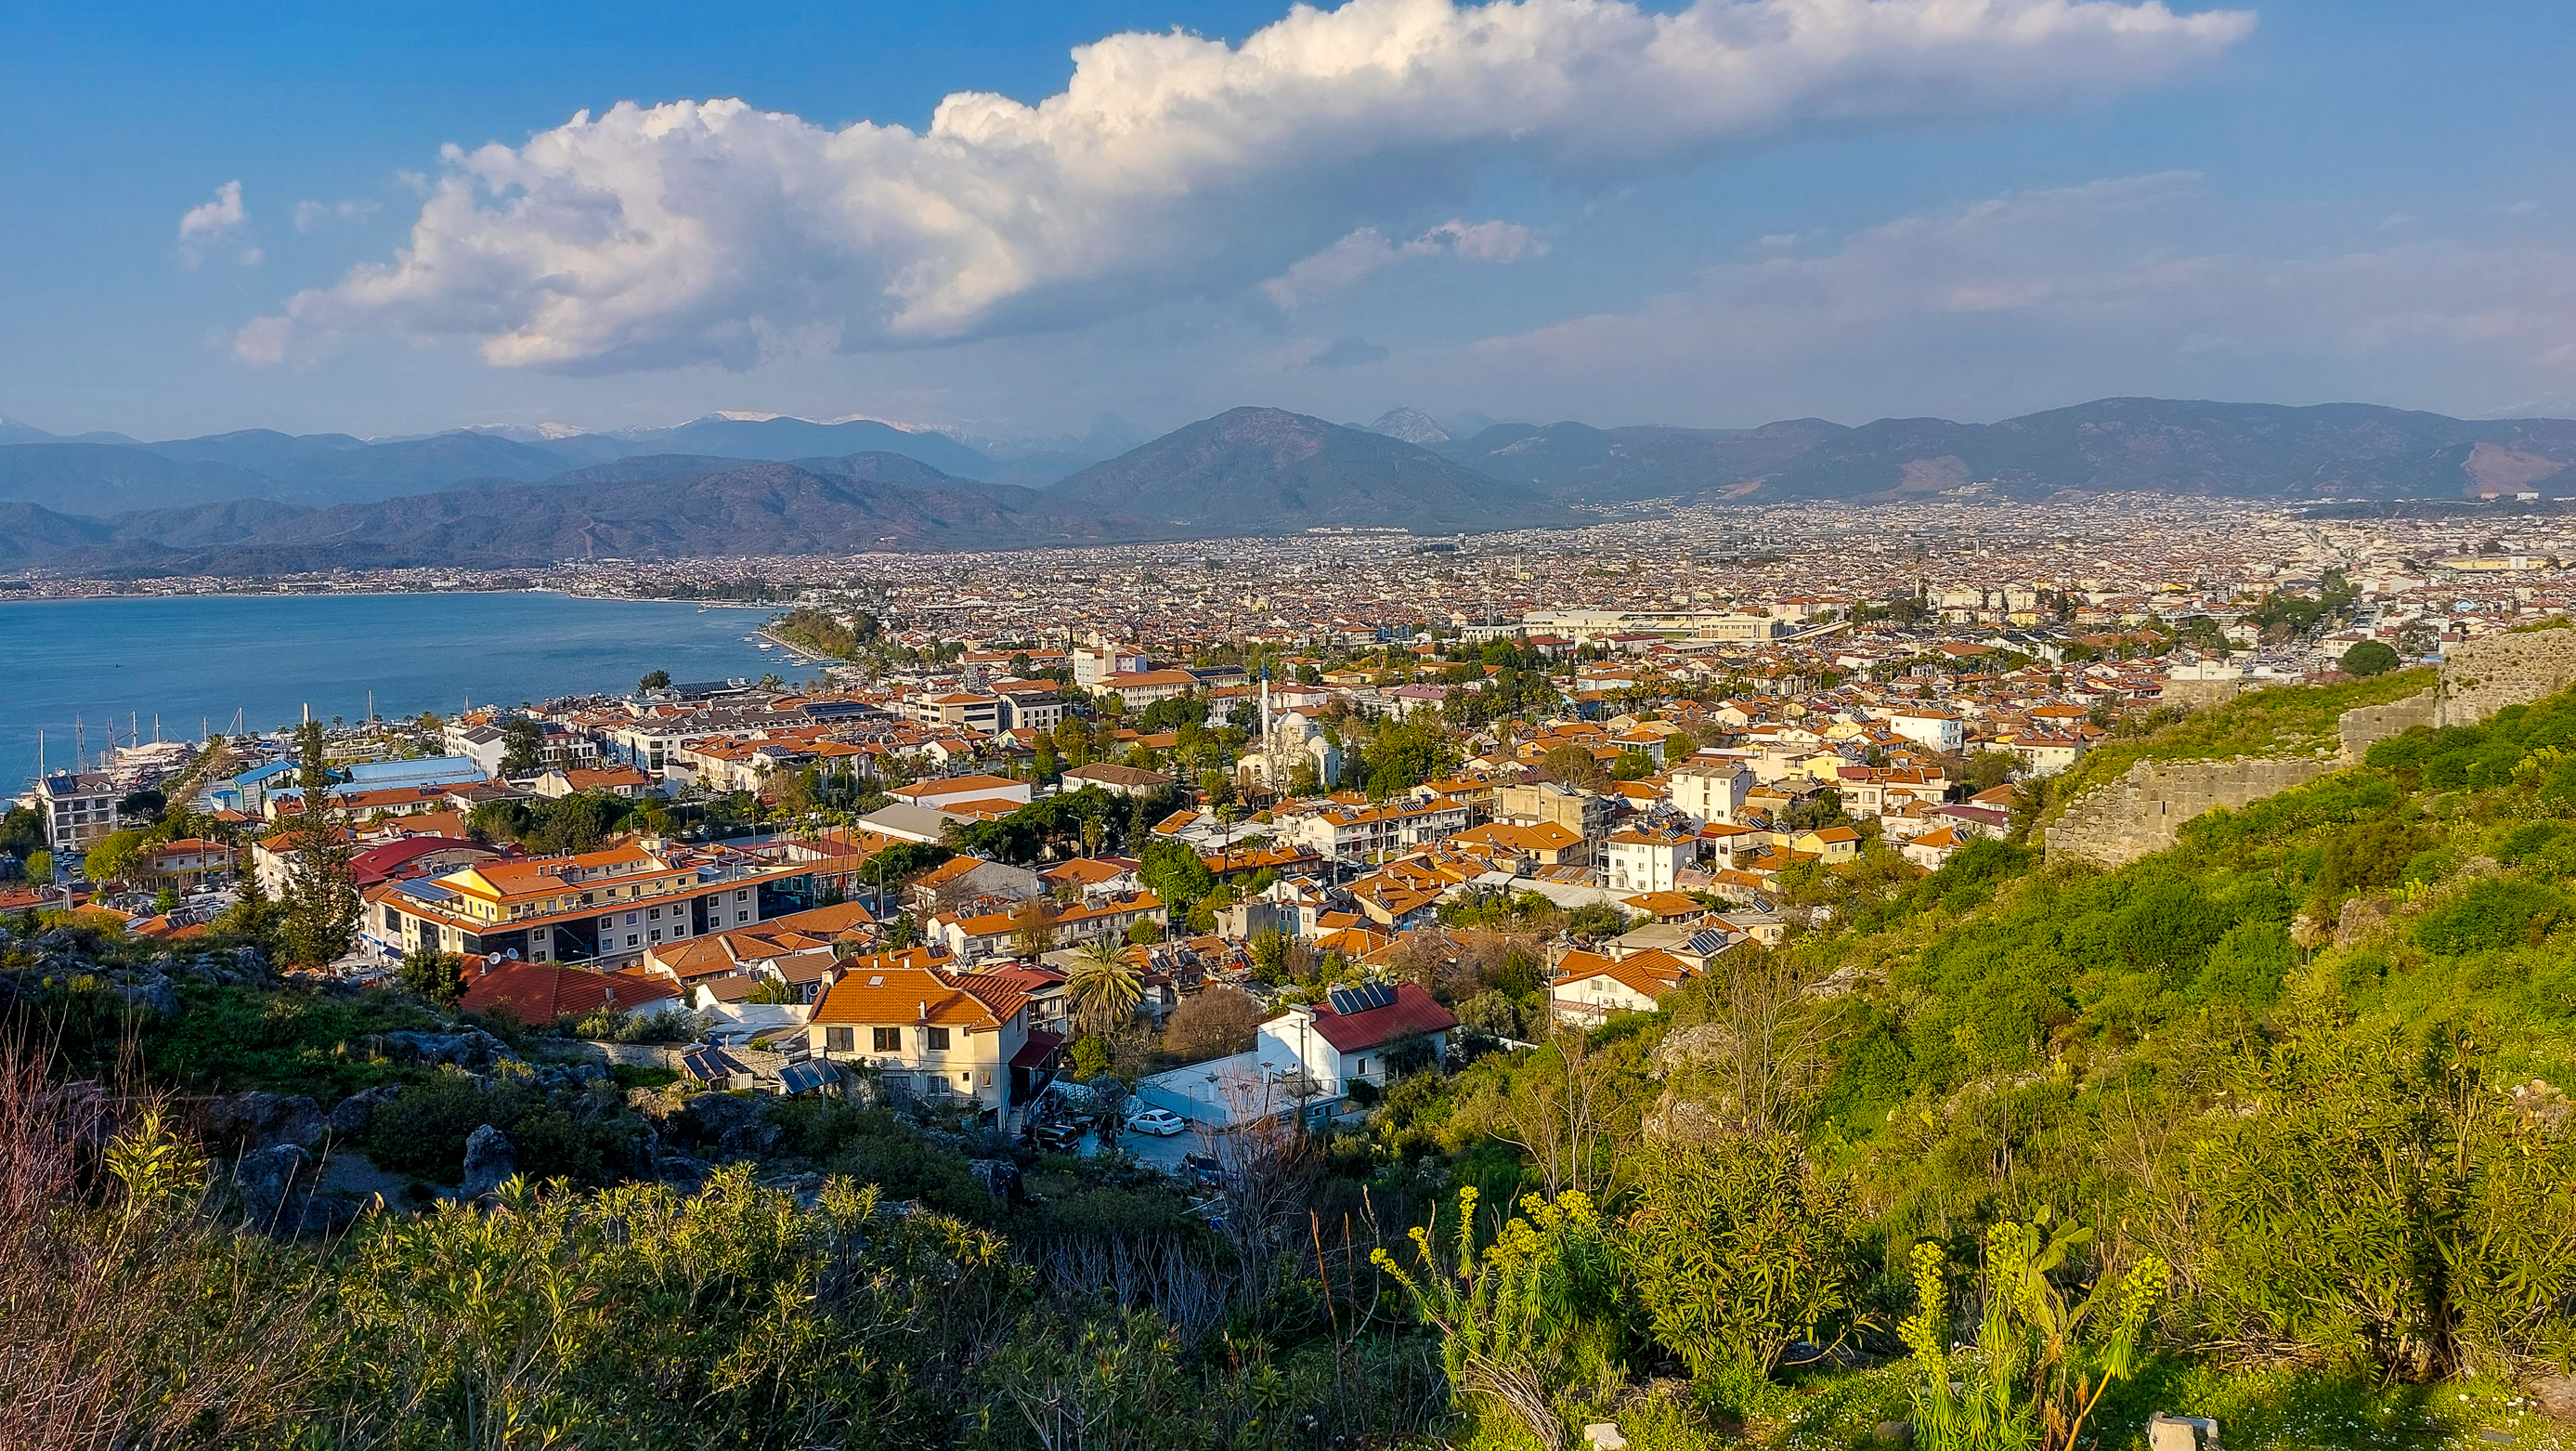 <span  class="uc_style_uc_tiles_grid_image_elementor_uc_items_attribute_title" style="color:#FFFFFF;">View over the city 'Fethiye'</span>